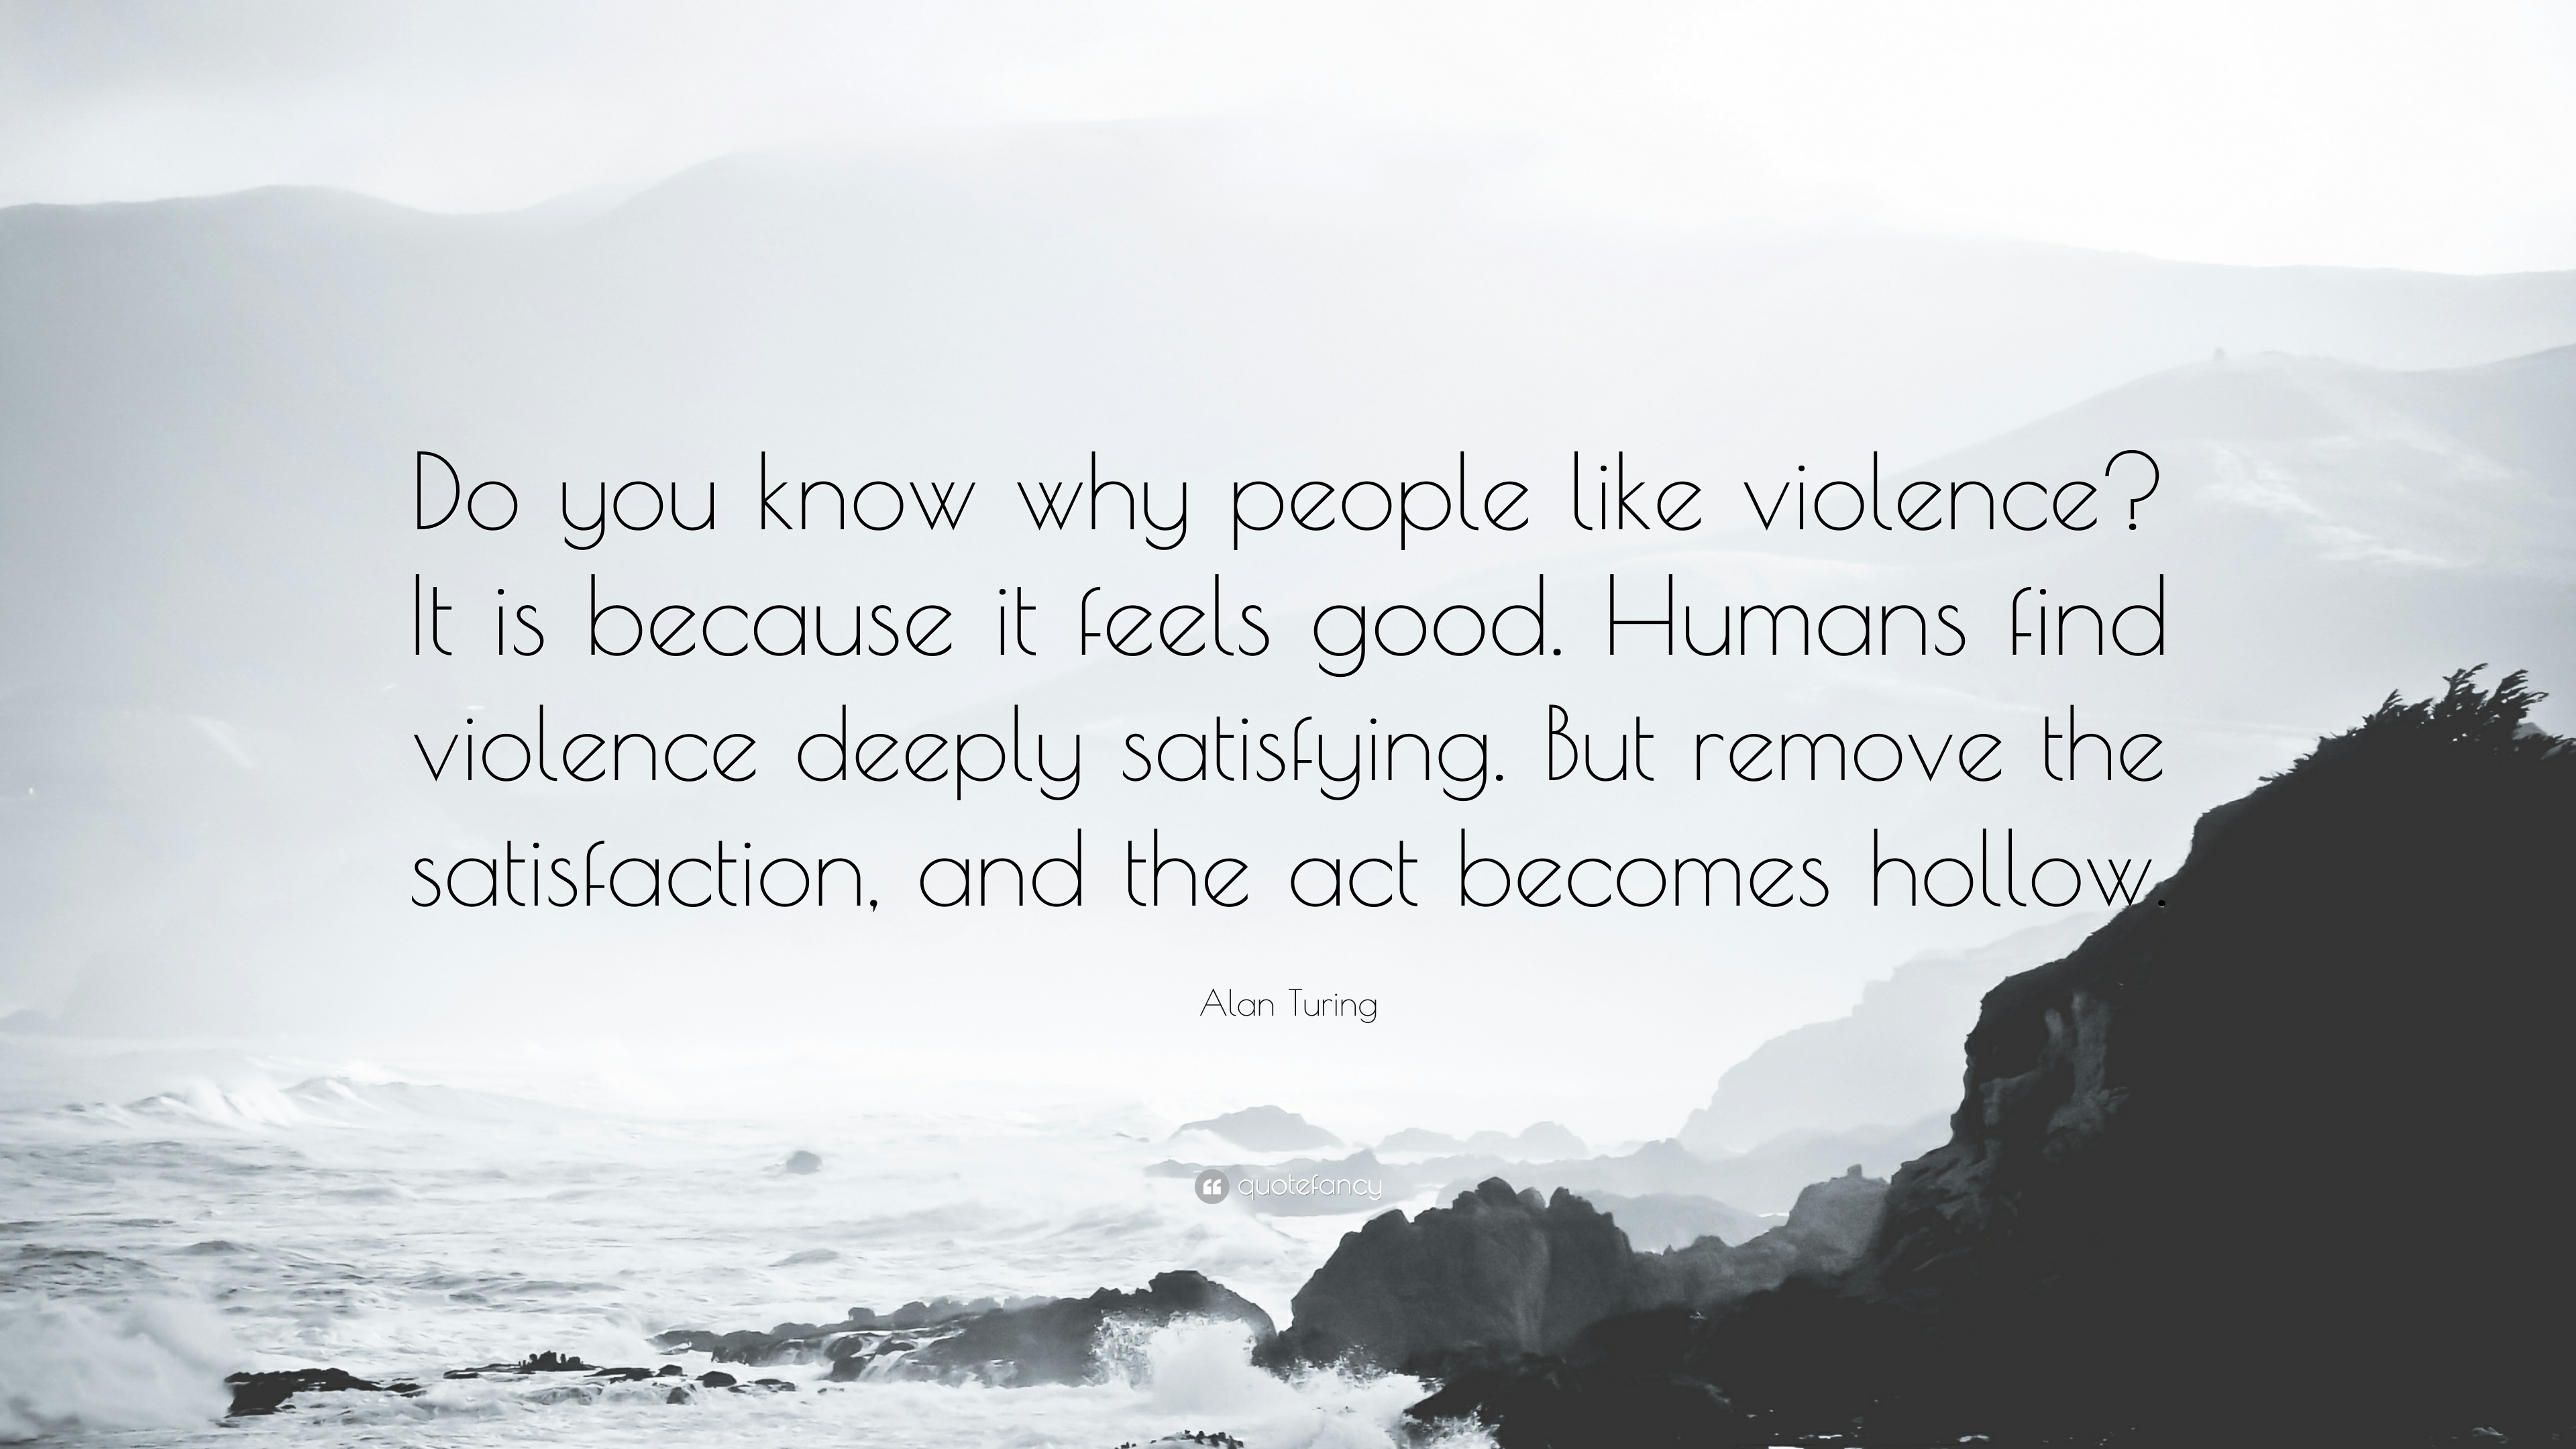 Alan Turing Quote: “Do you know why people like violence? It is